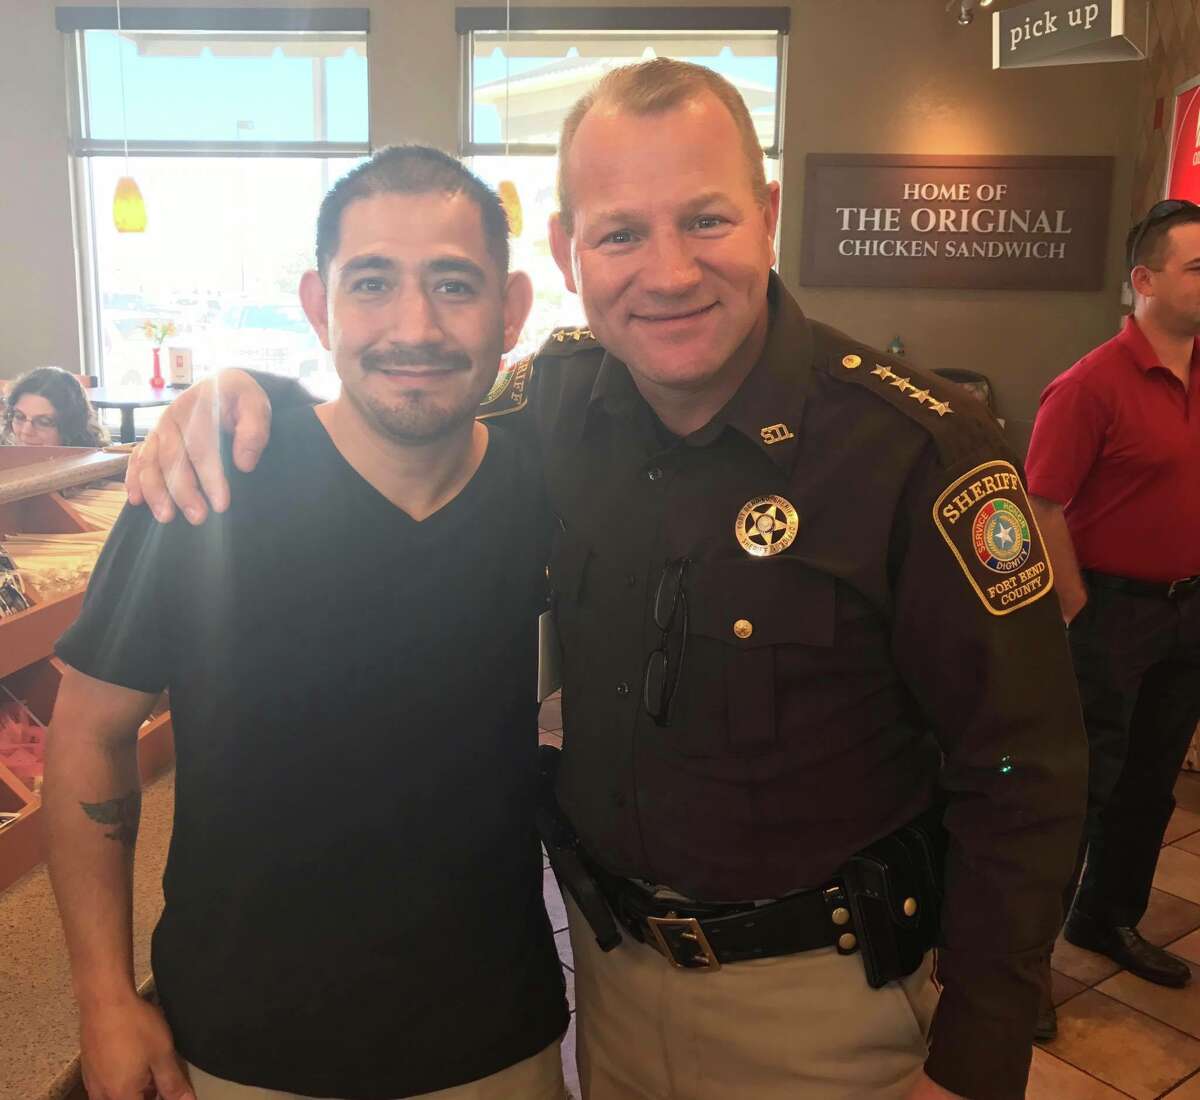 Louis Palacios, left, said Thursday that he is grateful to Sheriff Troy Nehls, who used the Heimlich maneuver to save Palacios from choking at the Rosenberg Chick-Fil-A on Feb. 22. 